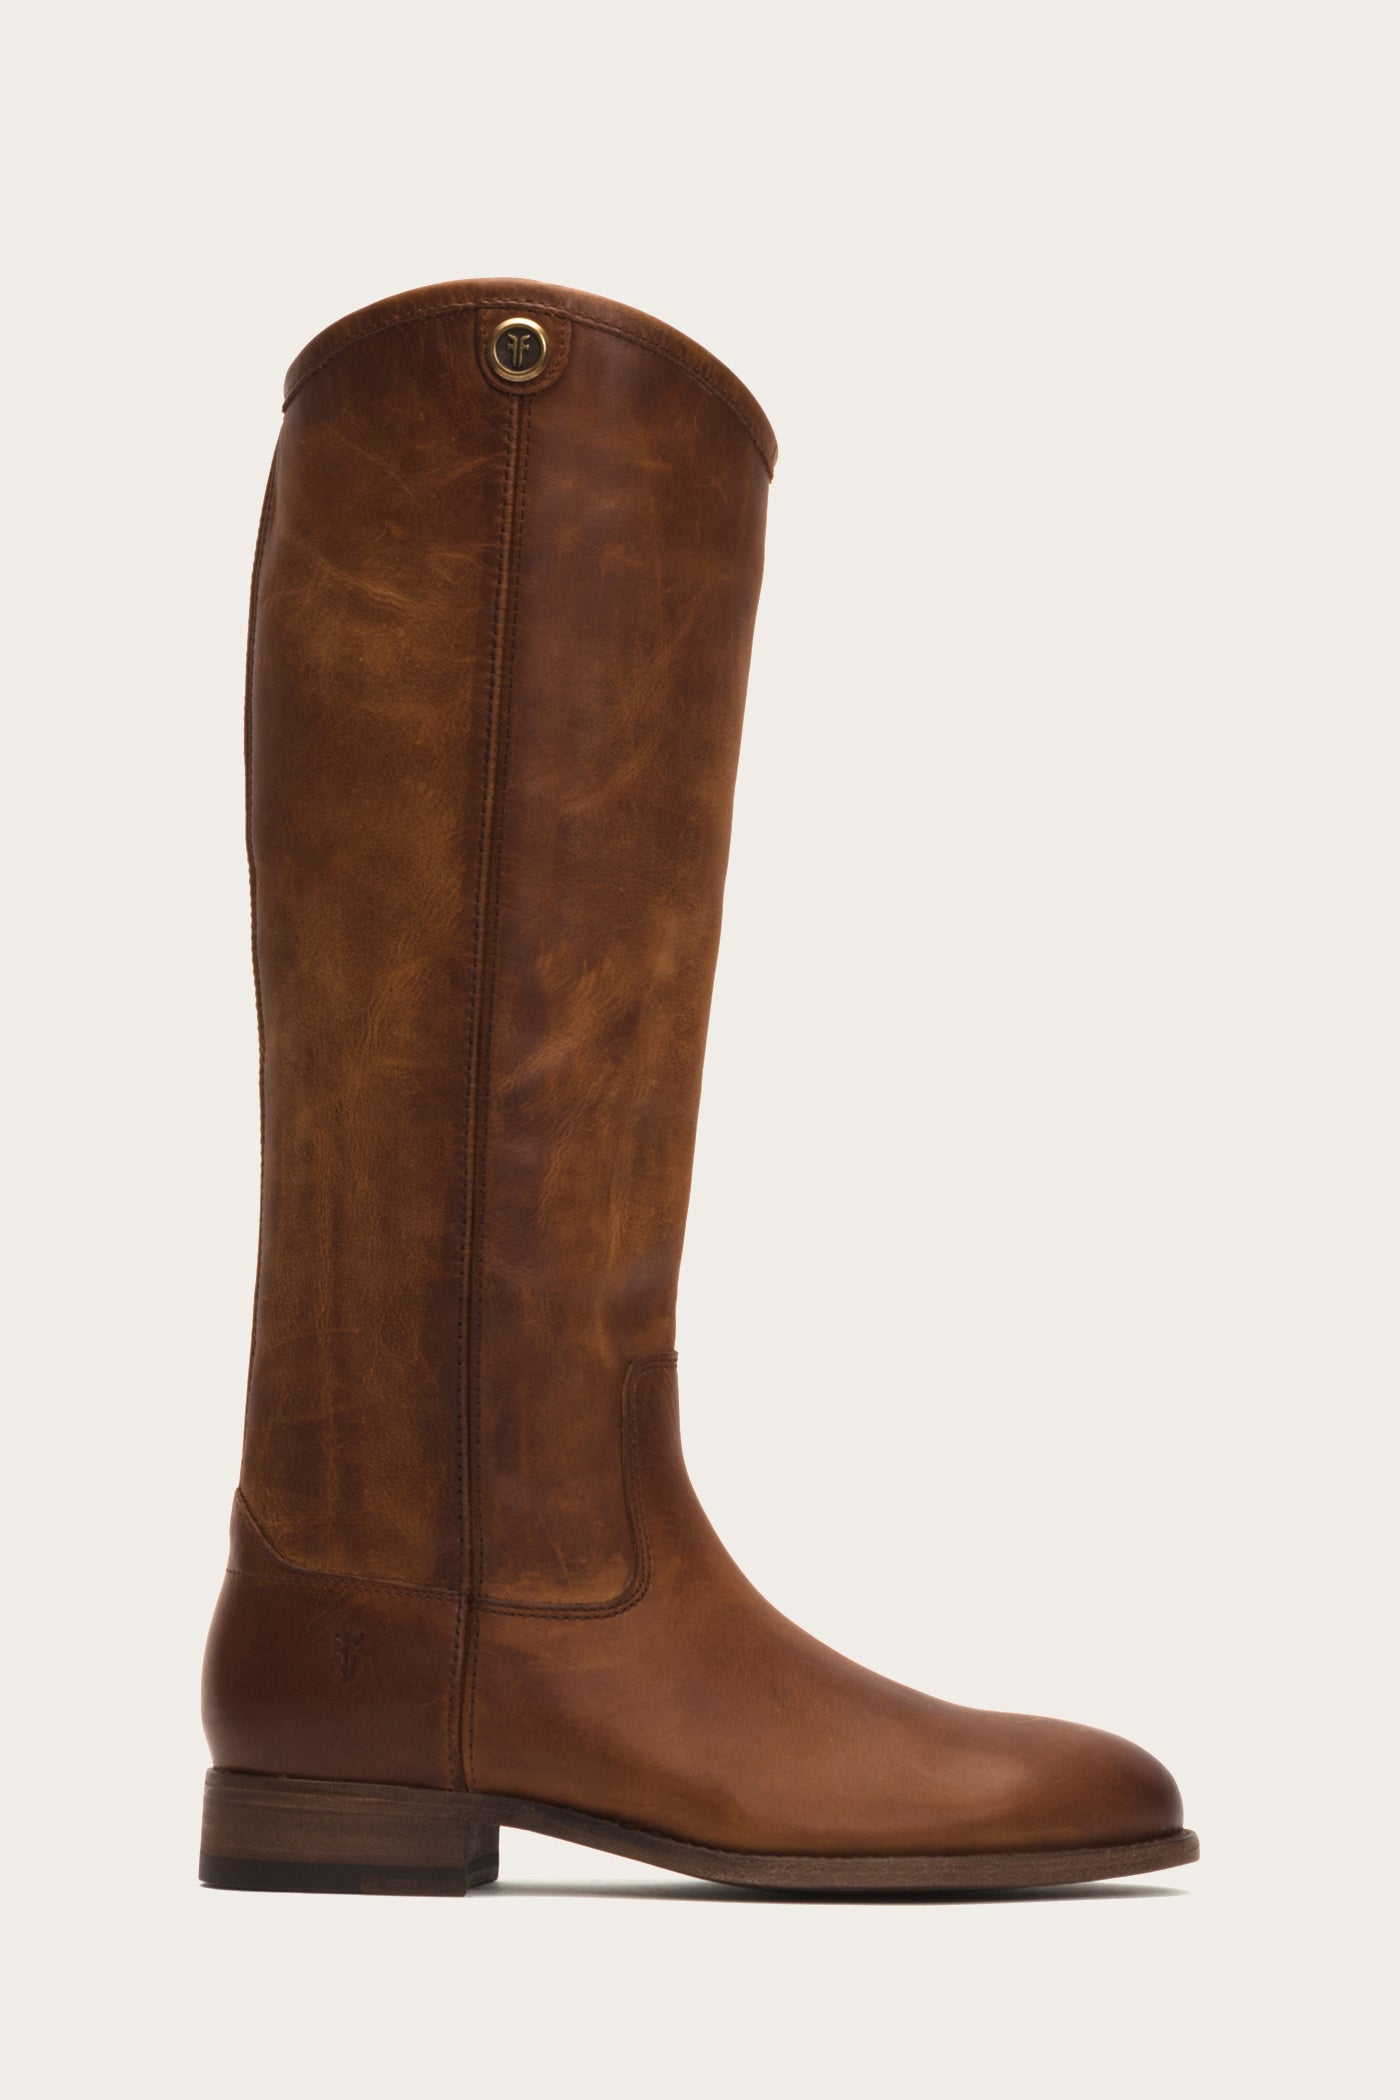 wide calf boots australia afterpay